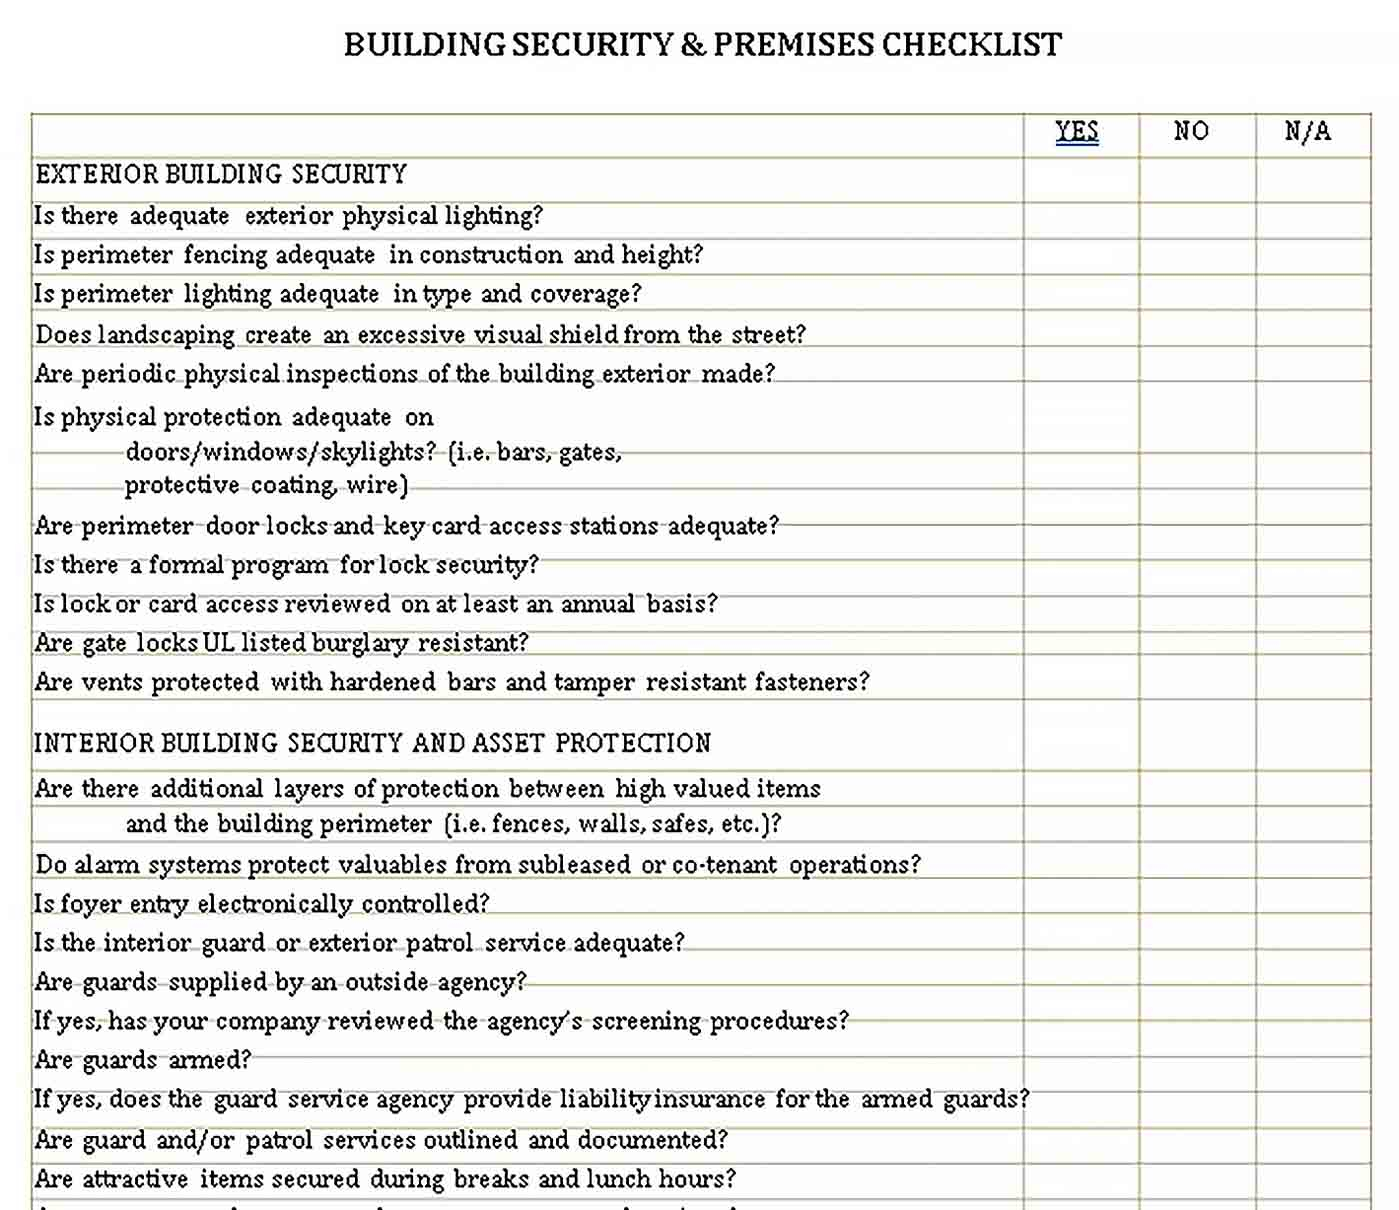 Sample building security checklist template  welding rodeo Designer Inside Building Security Checklist Template Intended For Building Security Checklist Template